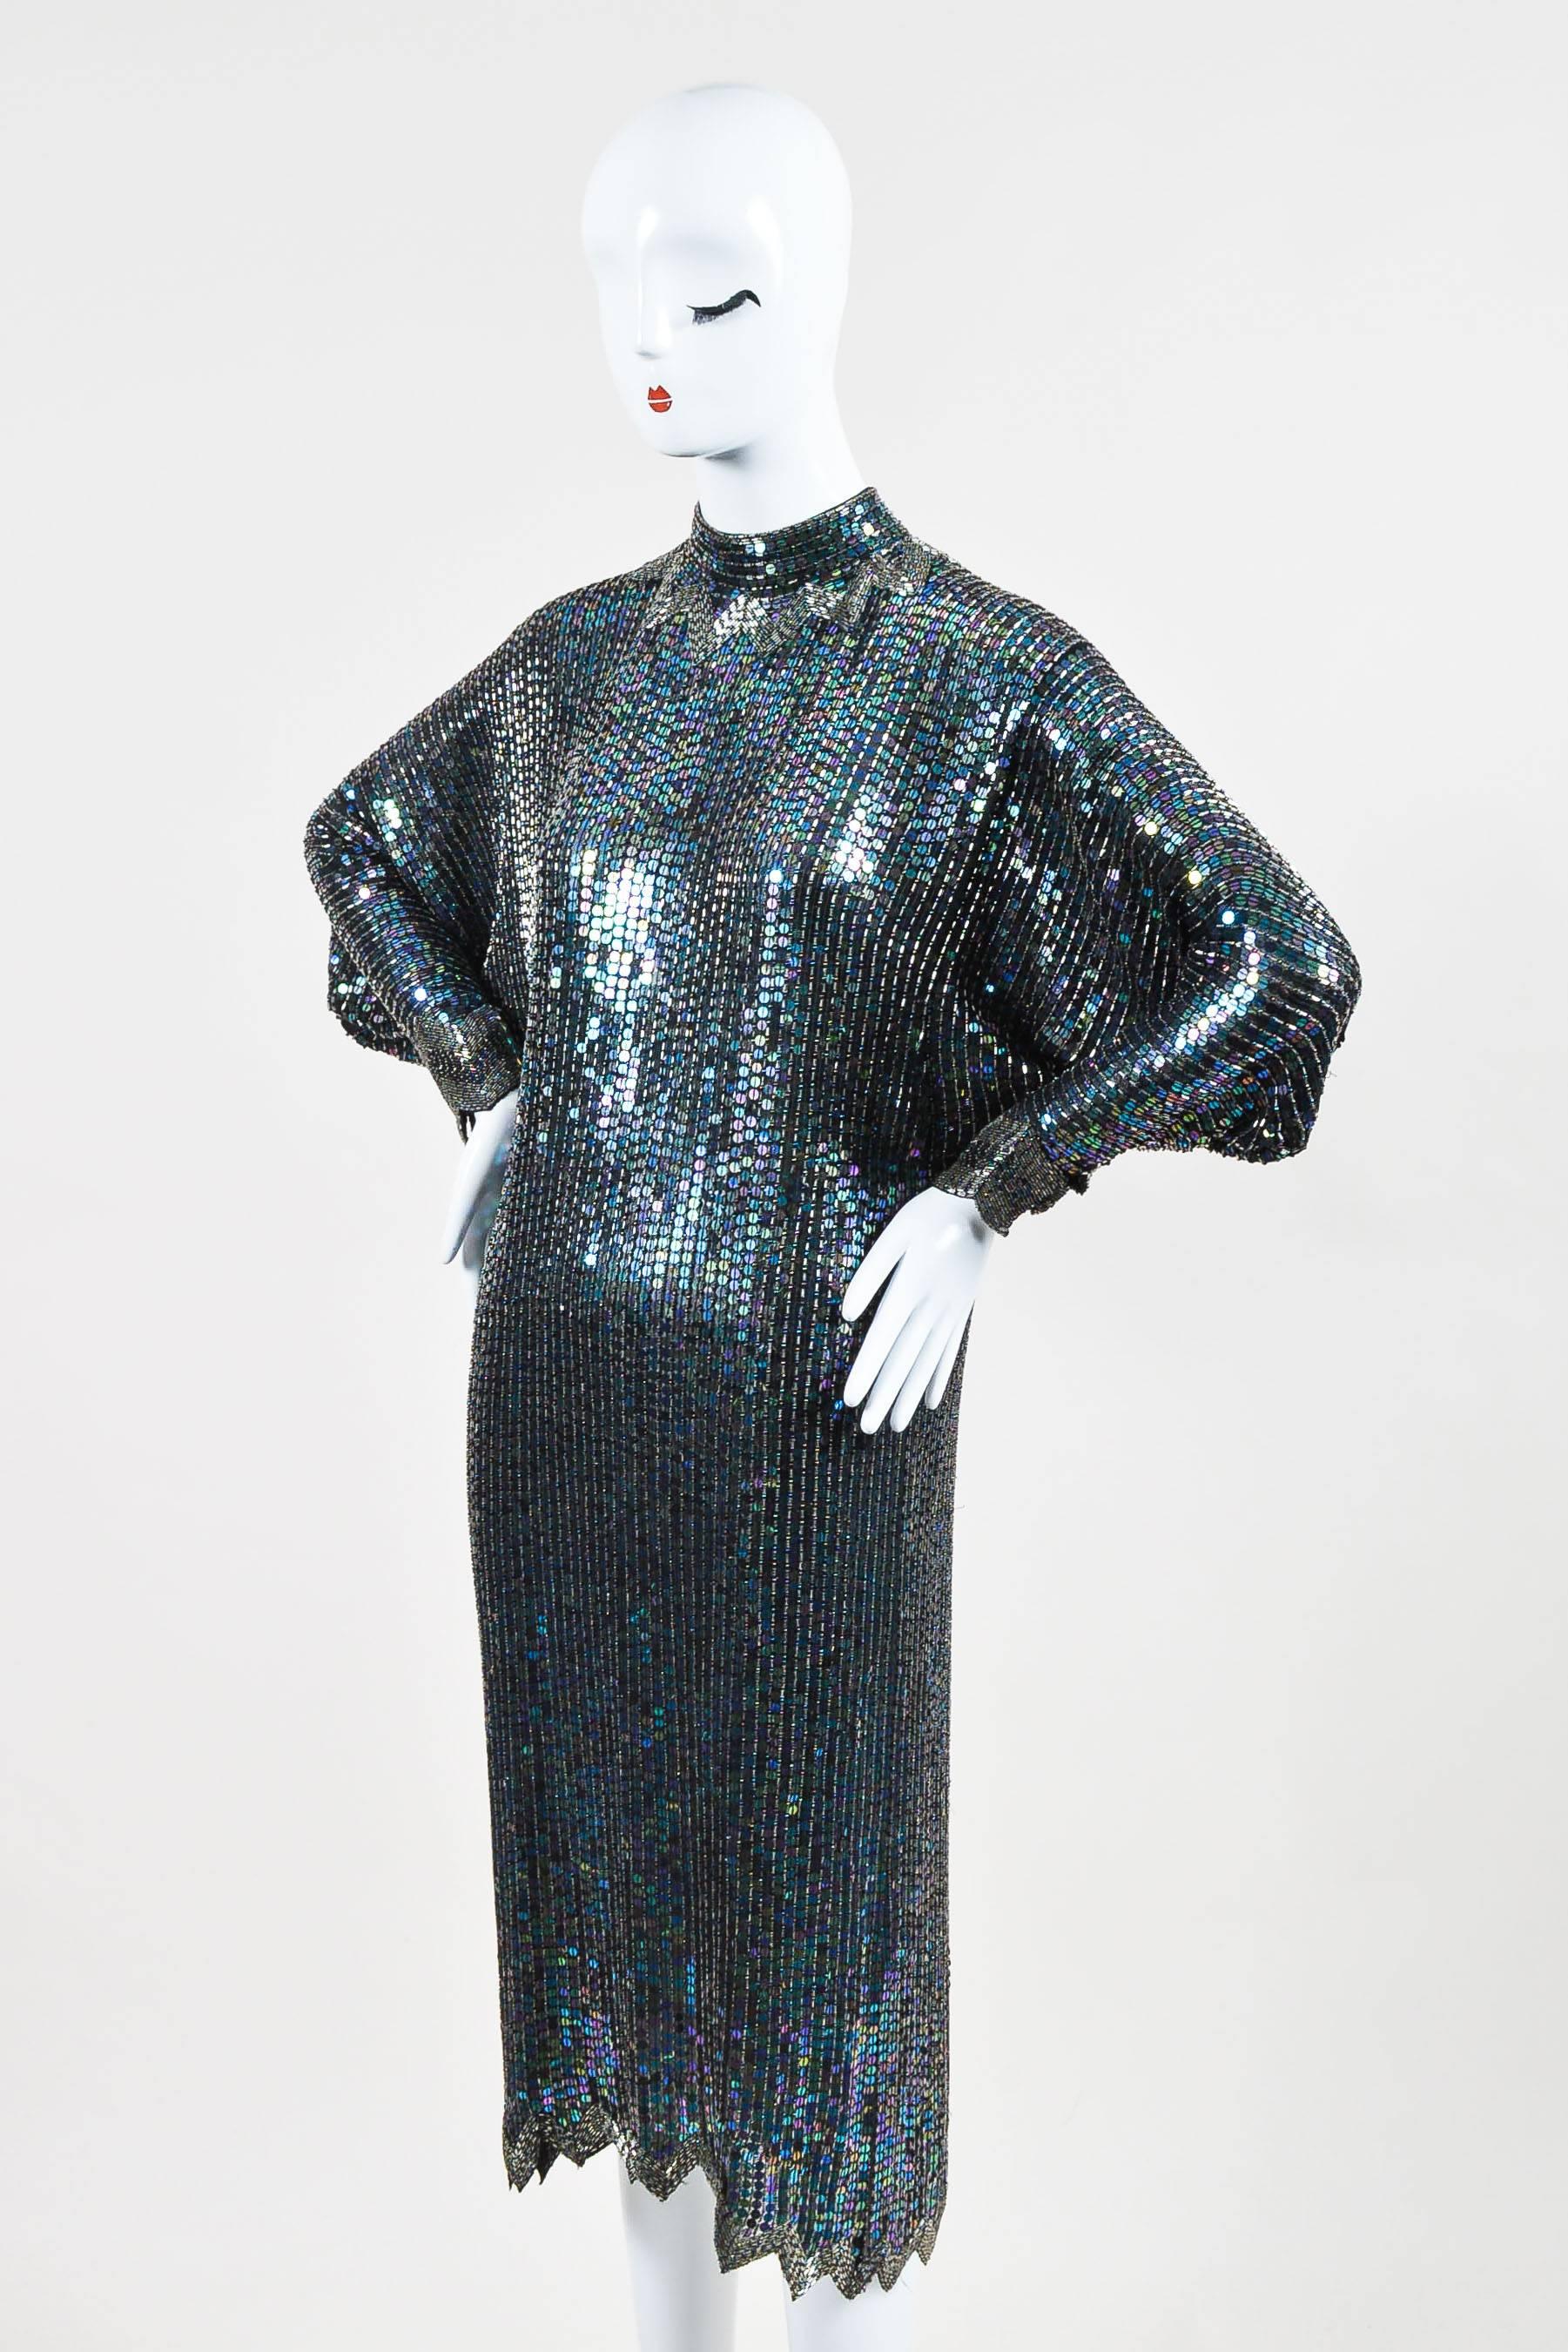 Showstopping vintage dress that oozes classic Halston glam. Sheer textile construction. Bold iridescent sequin and beaded embellishment throughout. High collar. Patterned beaded border trimmings. Scalloped hem. Long dolman sleeves. Hits below knees.